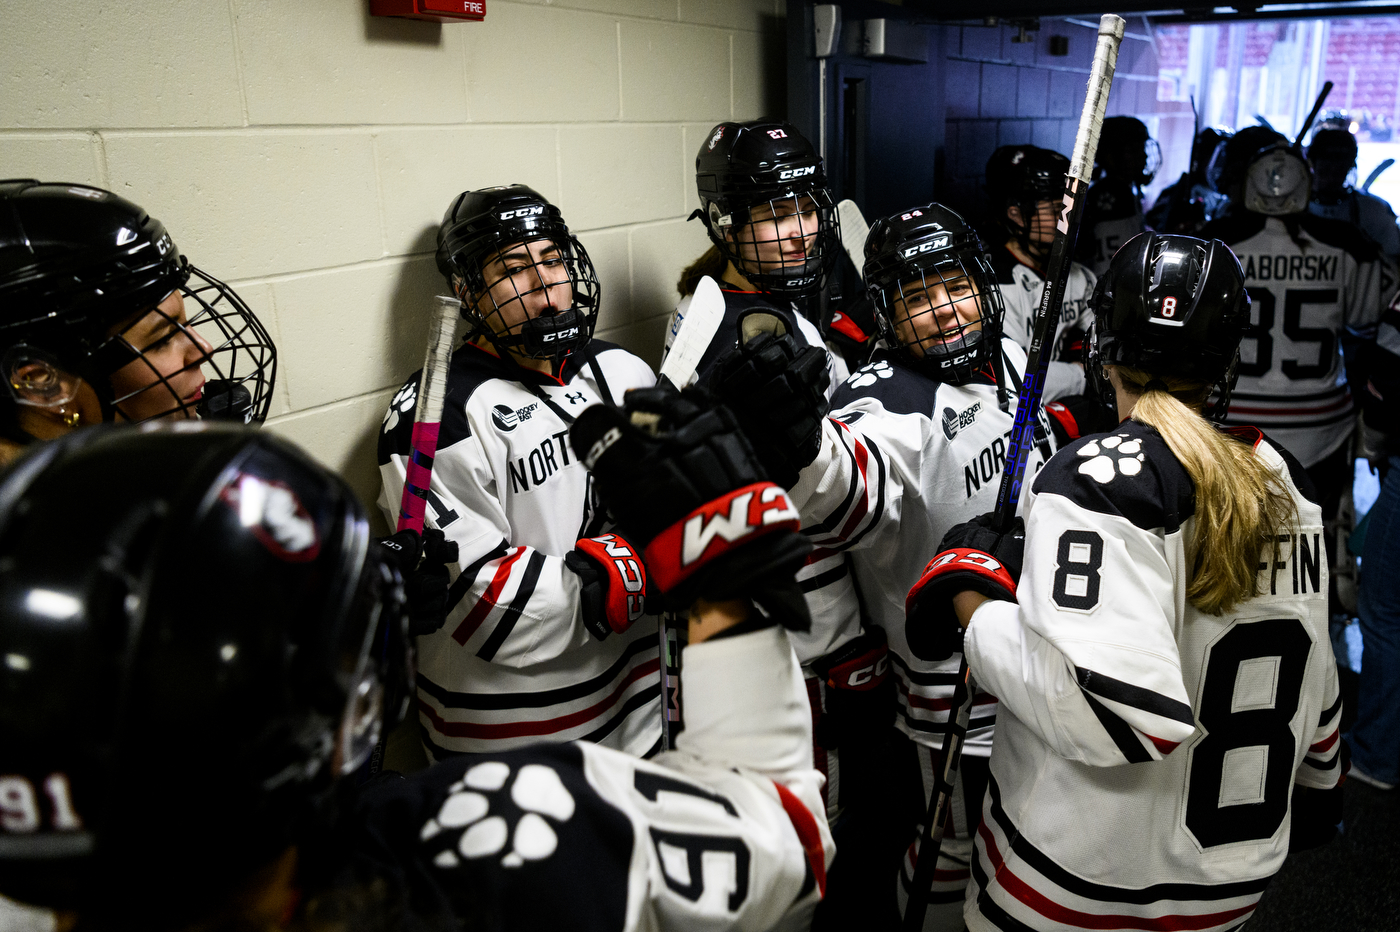 northeastern womens hockey players lined up waiting to enter rink